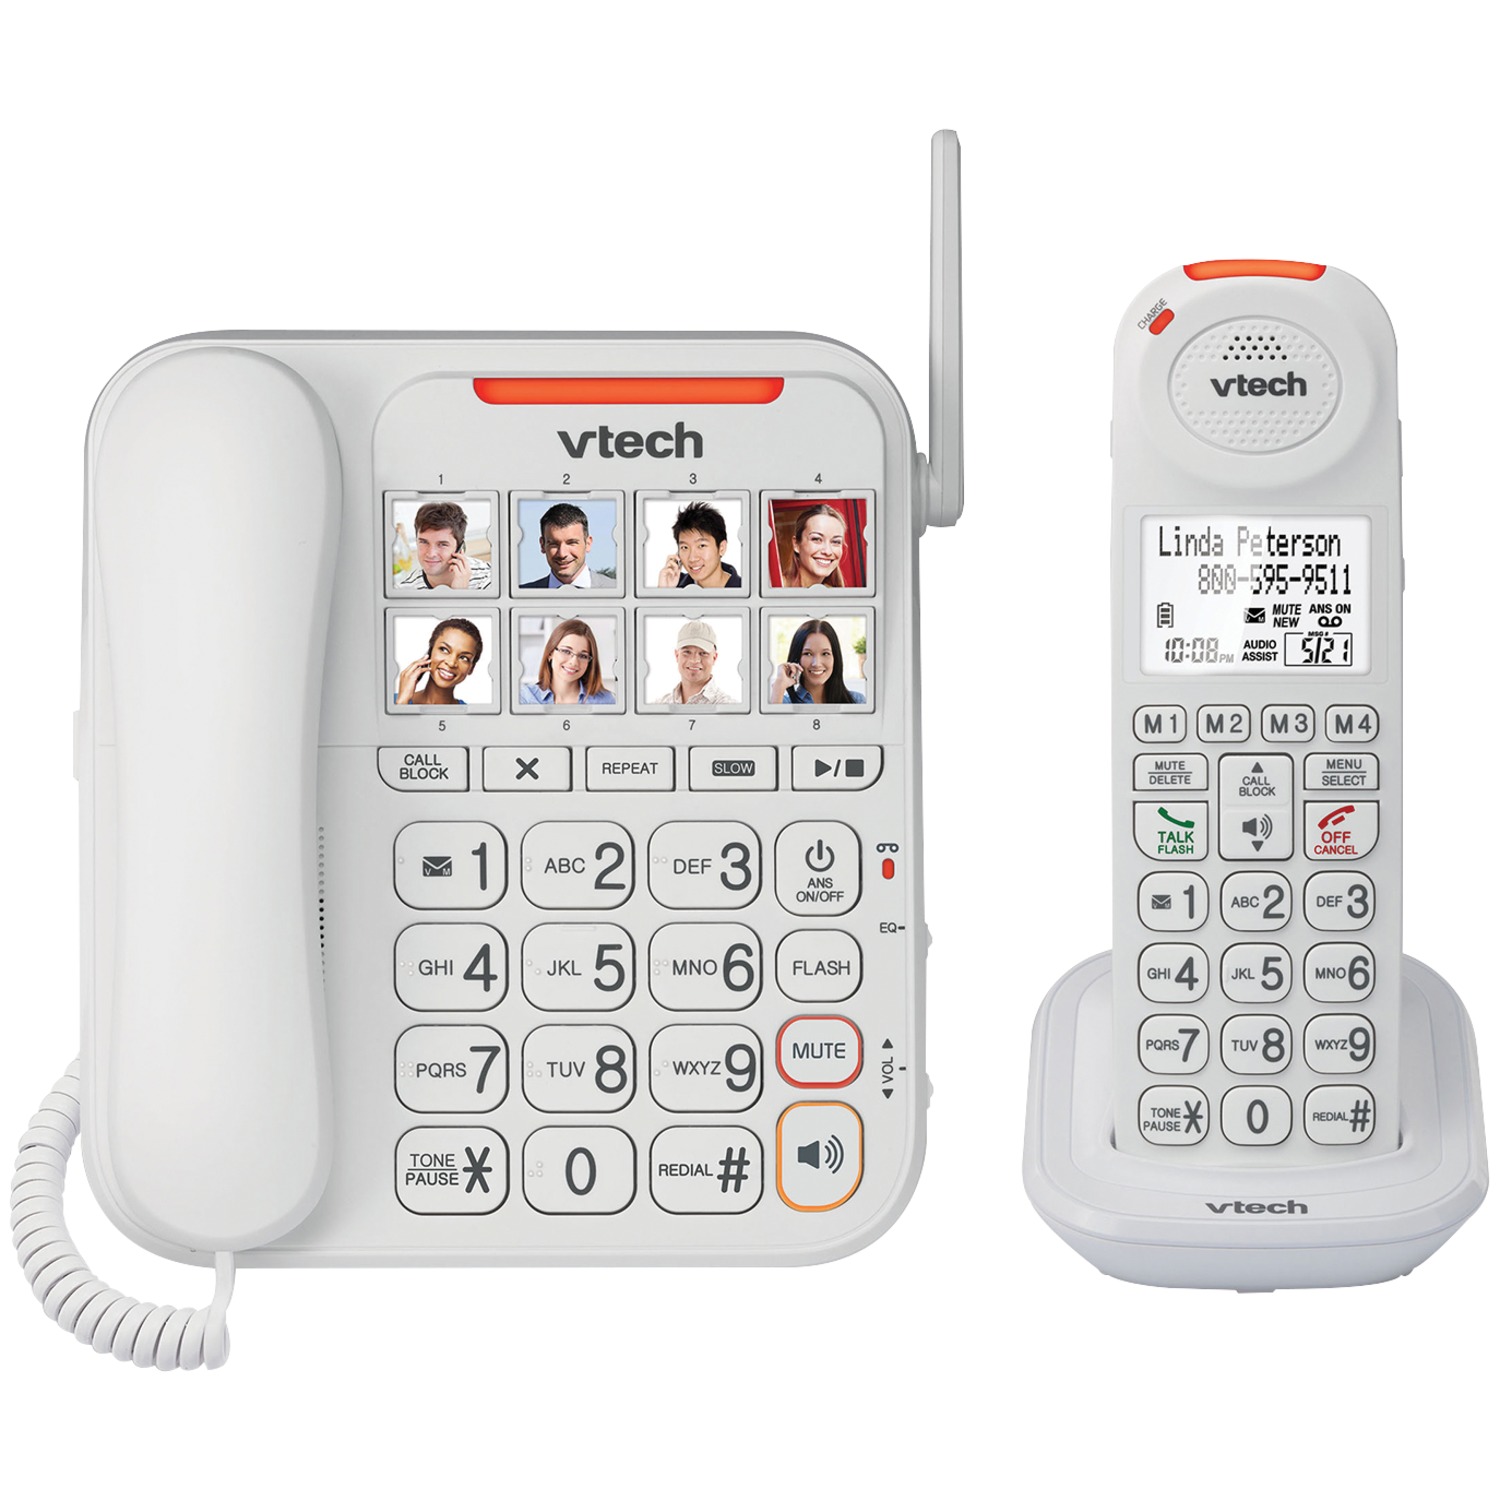 VTech Amplified Corded/Cordless Answering System with Big Buttons & Display, VTSN5147 - image 1 of 3